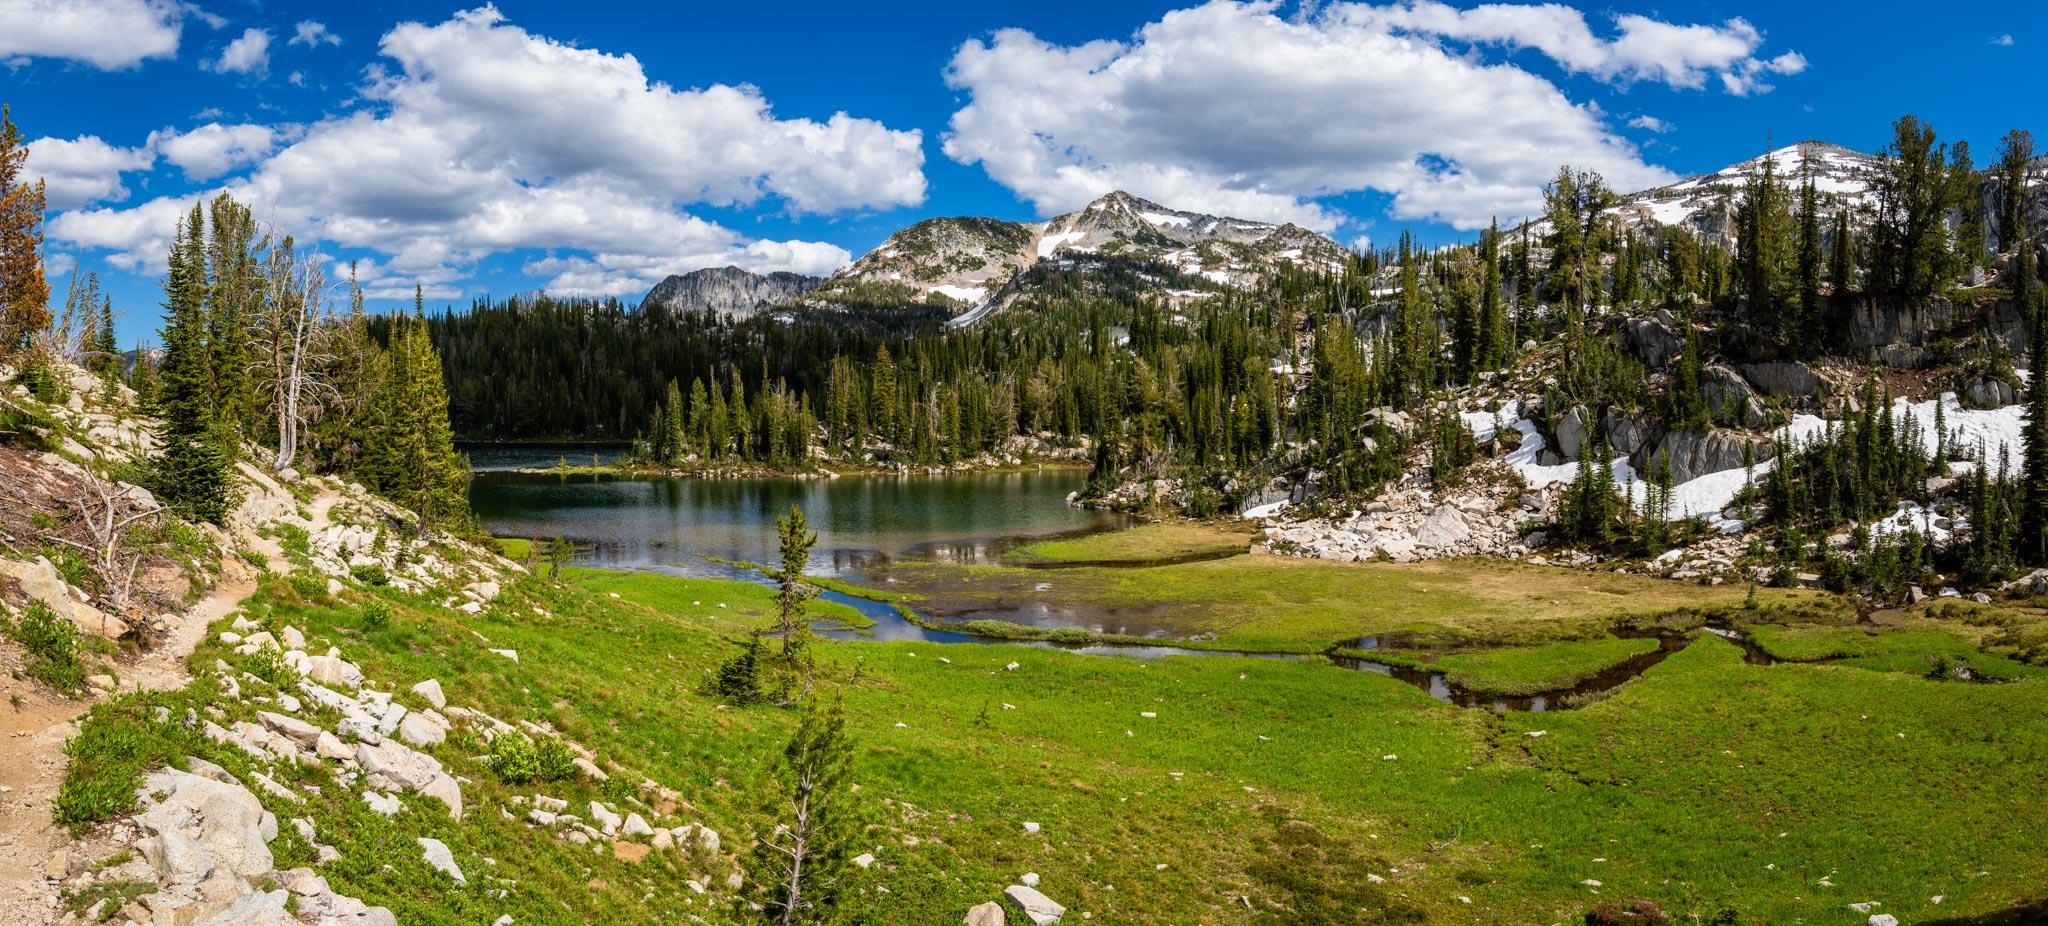 Moccasin Lake in the Eagle Cap Wilderness